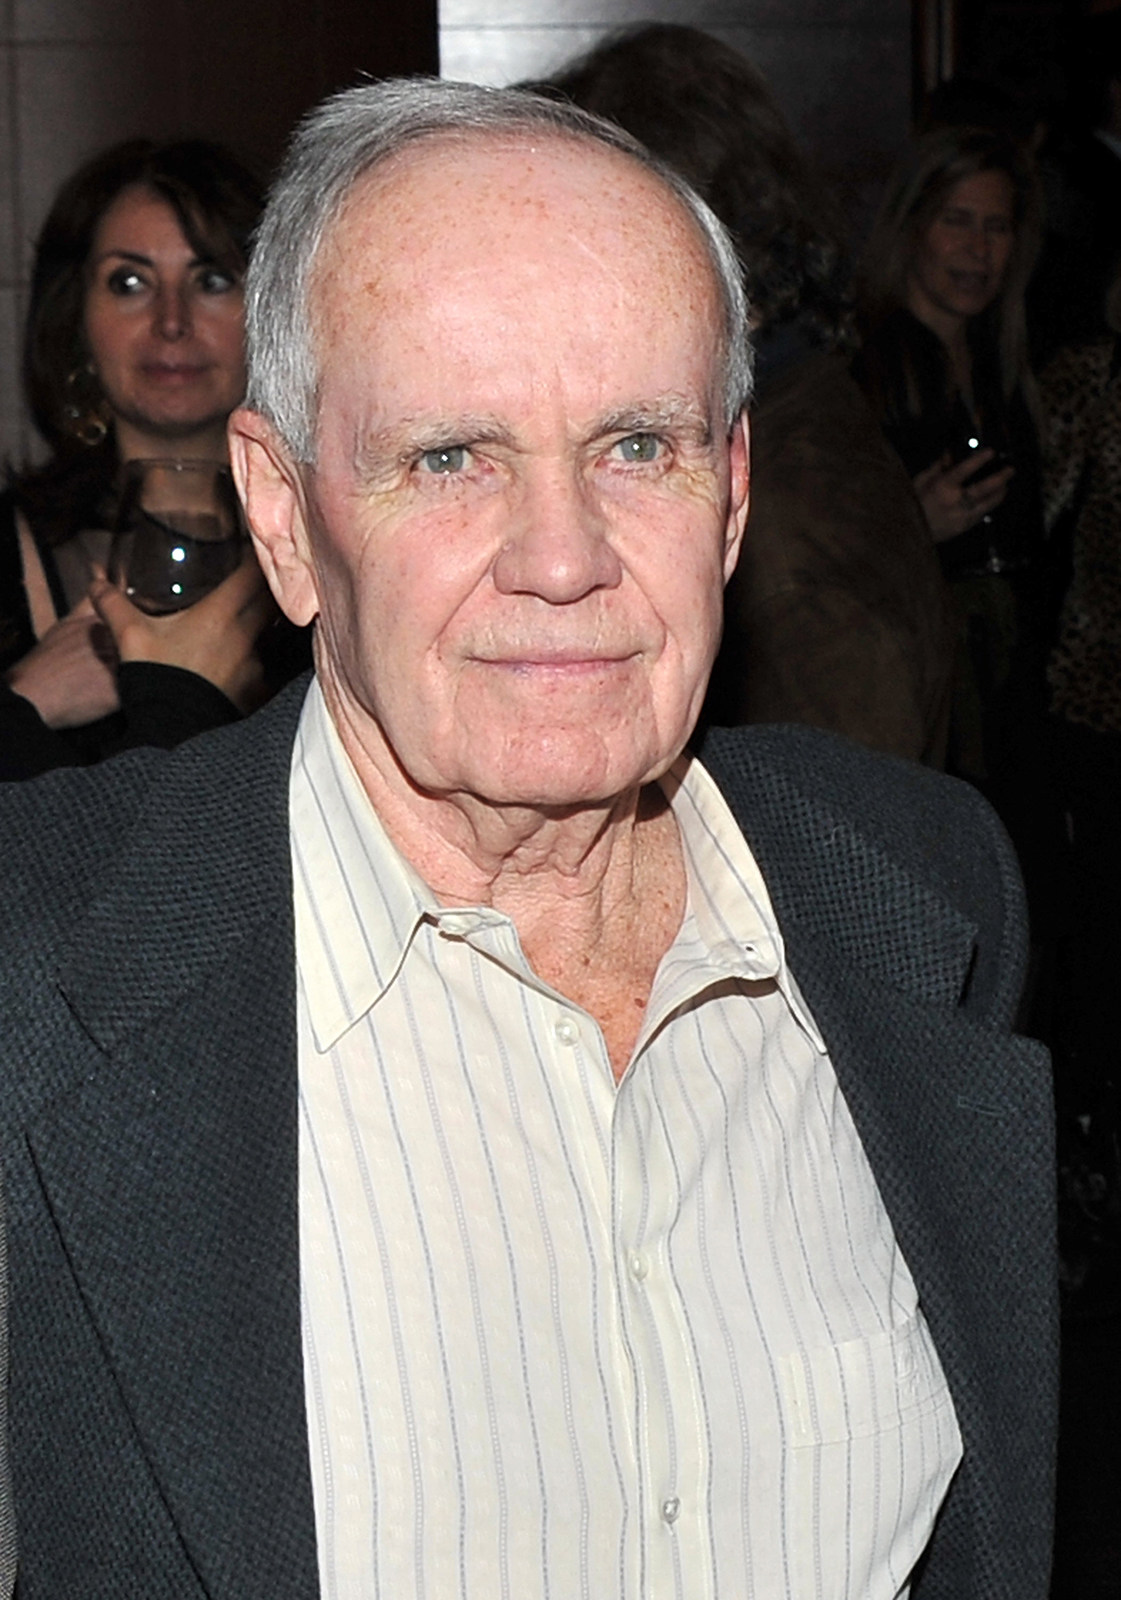 Late writer Cormac McCarthy attends the HBO Films & The Cinema Society screening of Sunset Limited at Porter House on February 1, 2011, in New York City. Photo: Getty Images